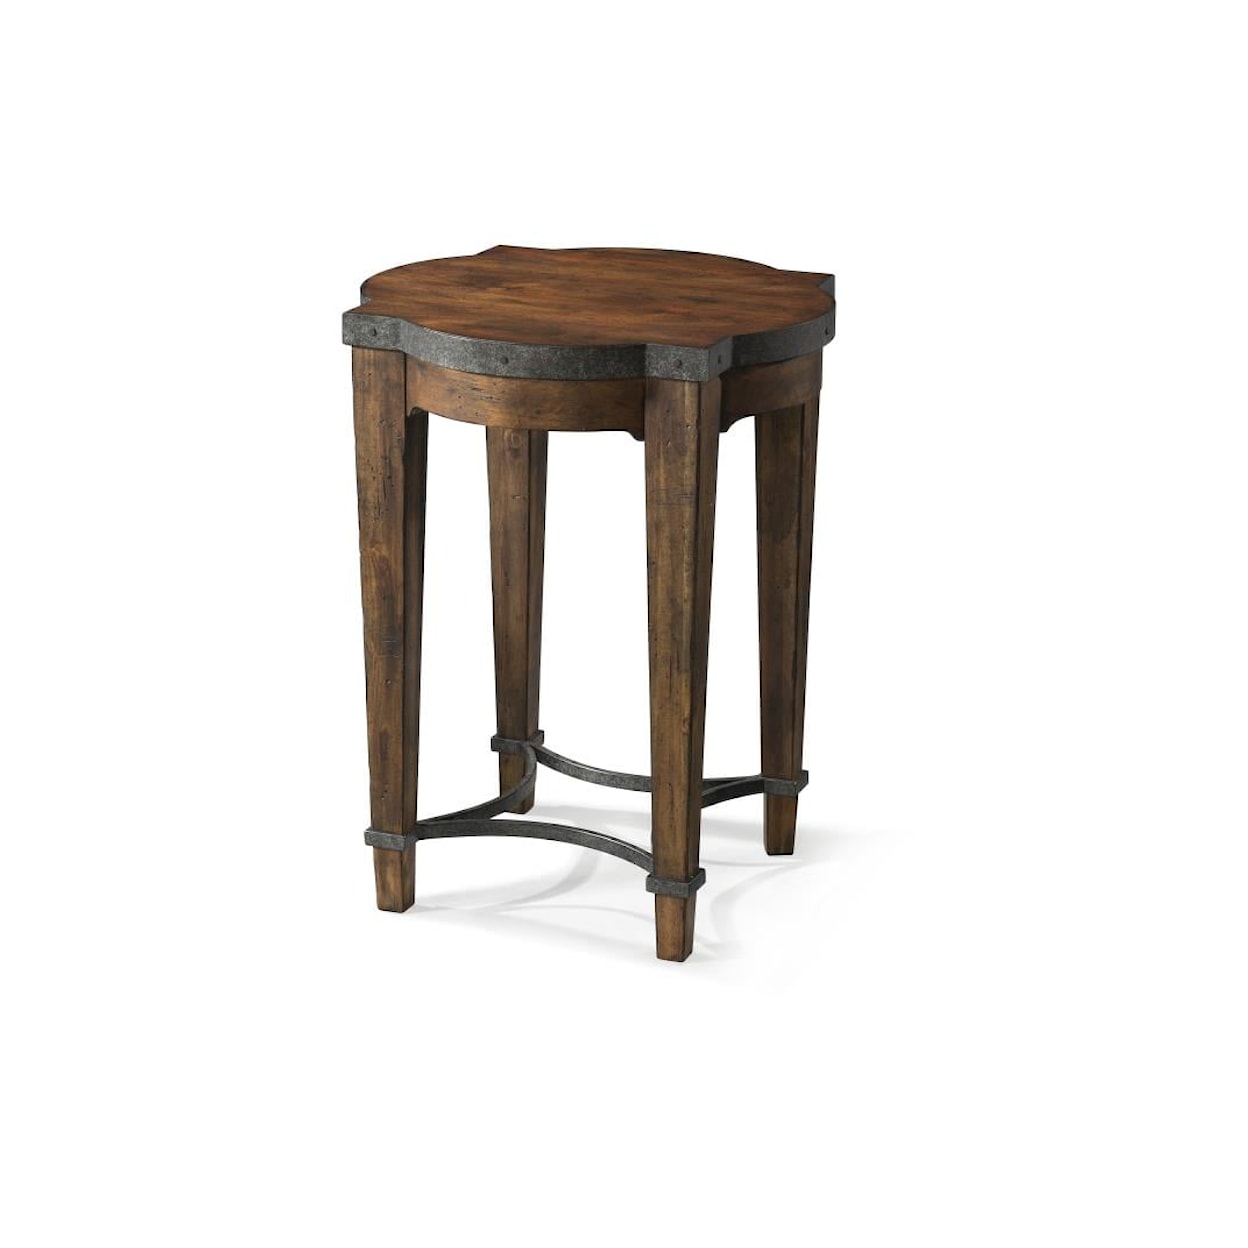 Trisha Yearwood Home Collection by Legacy Classic Trisha Yearwood Home Ginkgo Round Chairside Table